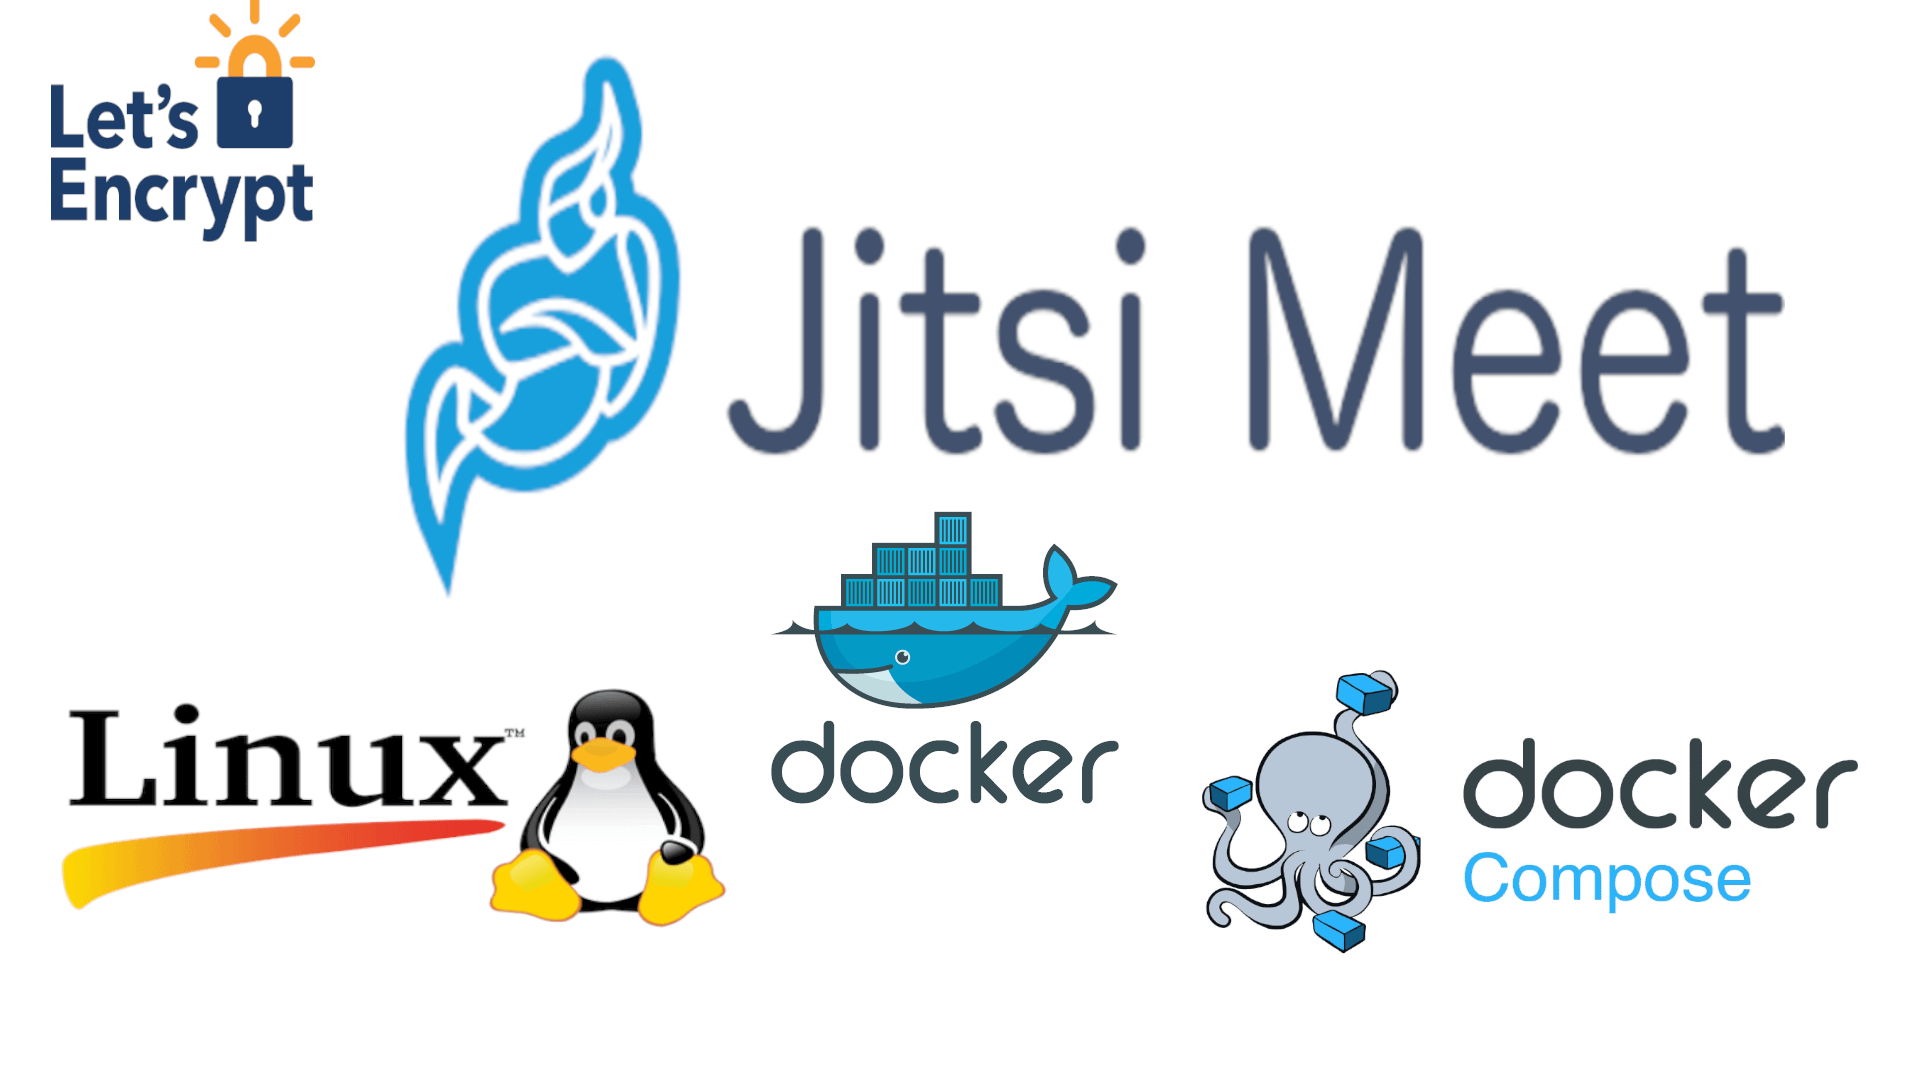 How To Easily Self-hosted Jitsi Meet With Docker